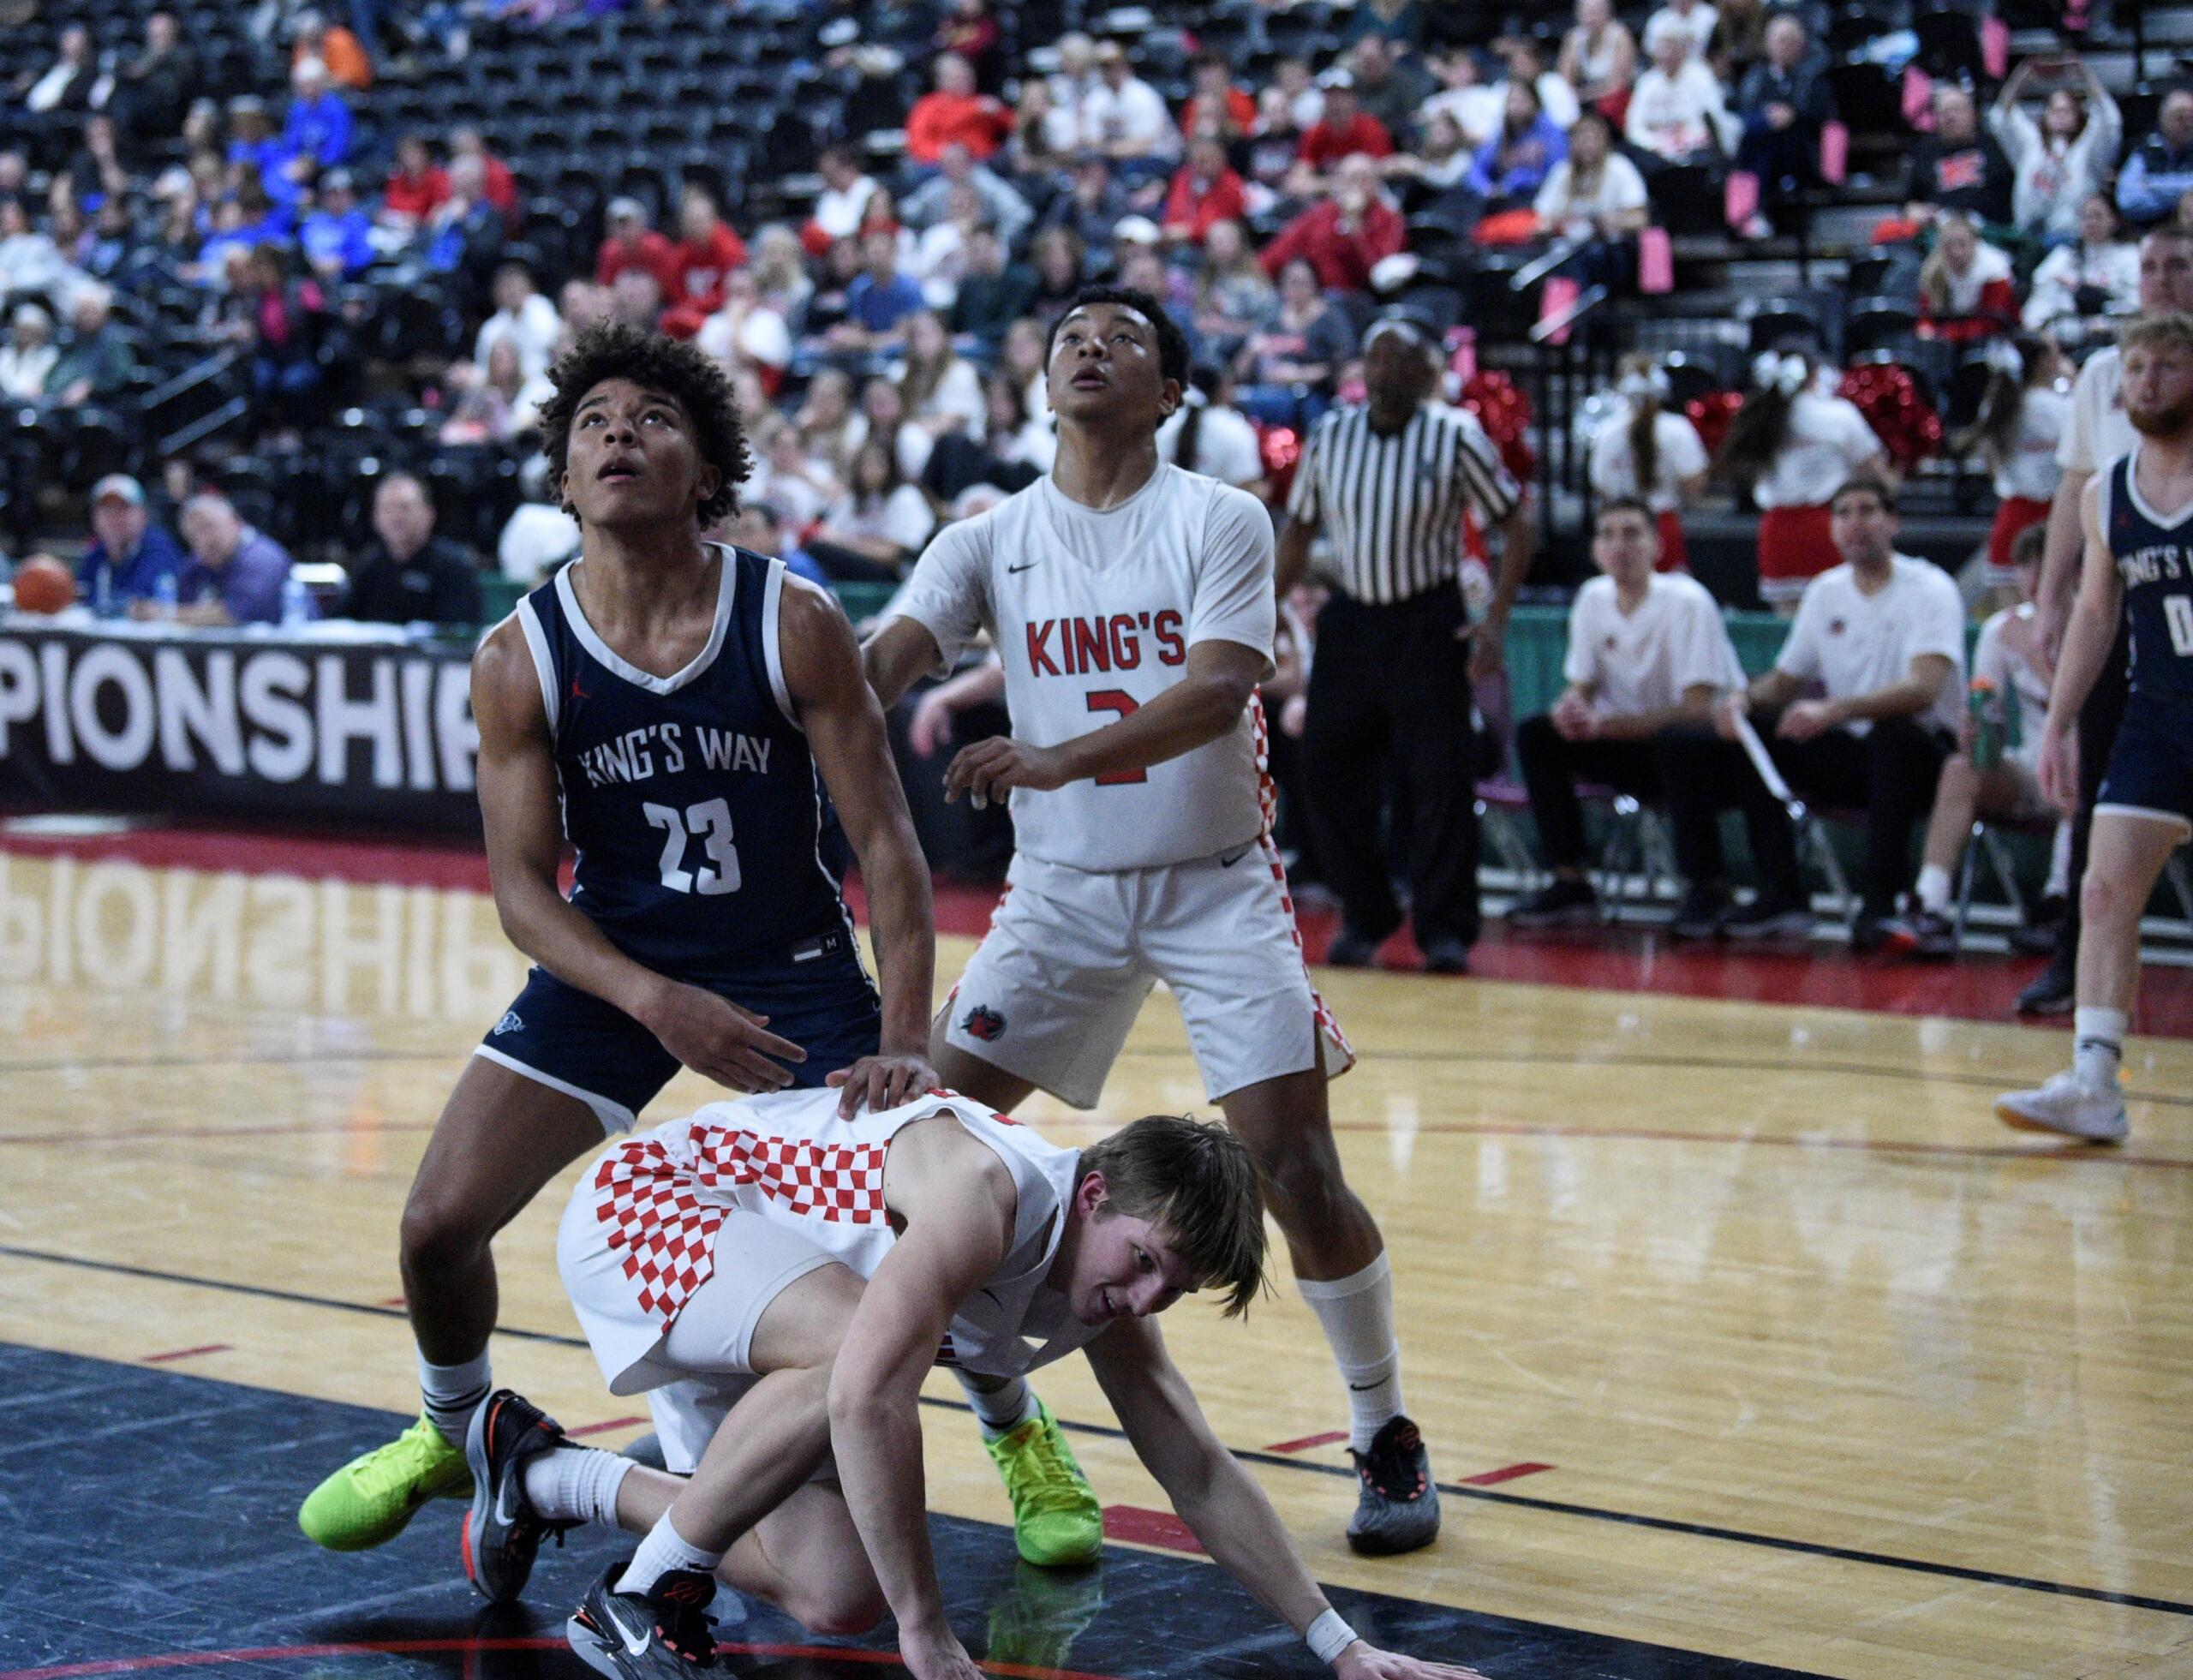 King’s Way Christian’s Jamison Duke (23) battles for a rebound against King’s during the first half of a Class 1A boys basketball state tournament game on Wednesday, March 1, 2023 in Yakima.